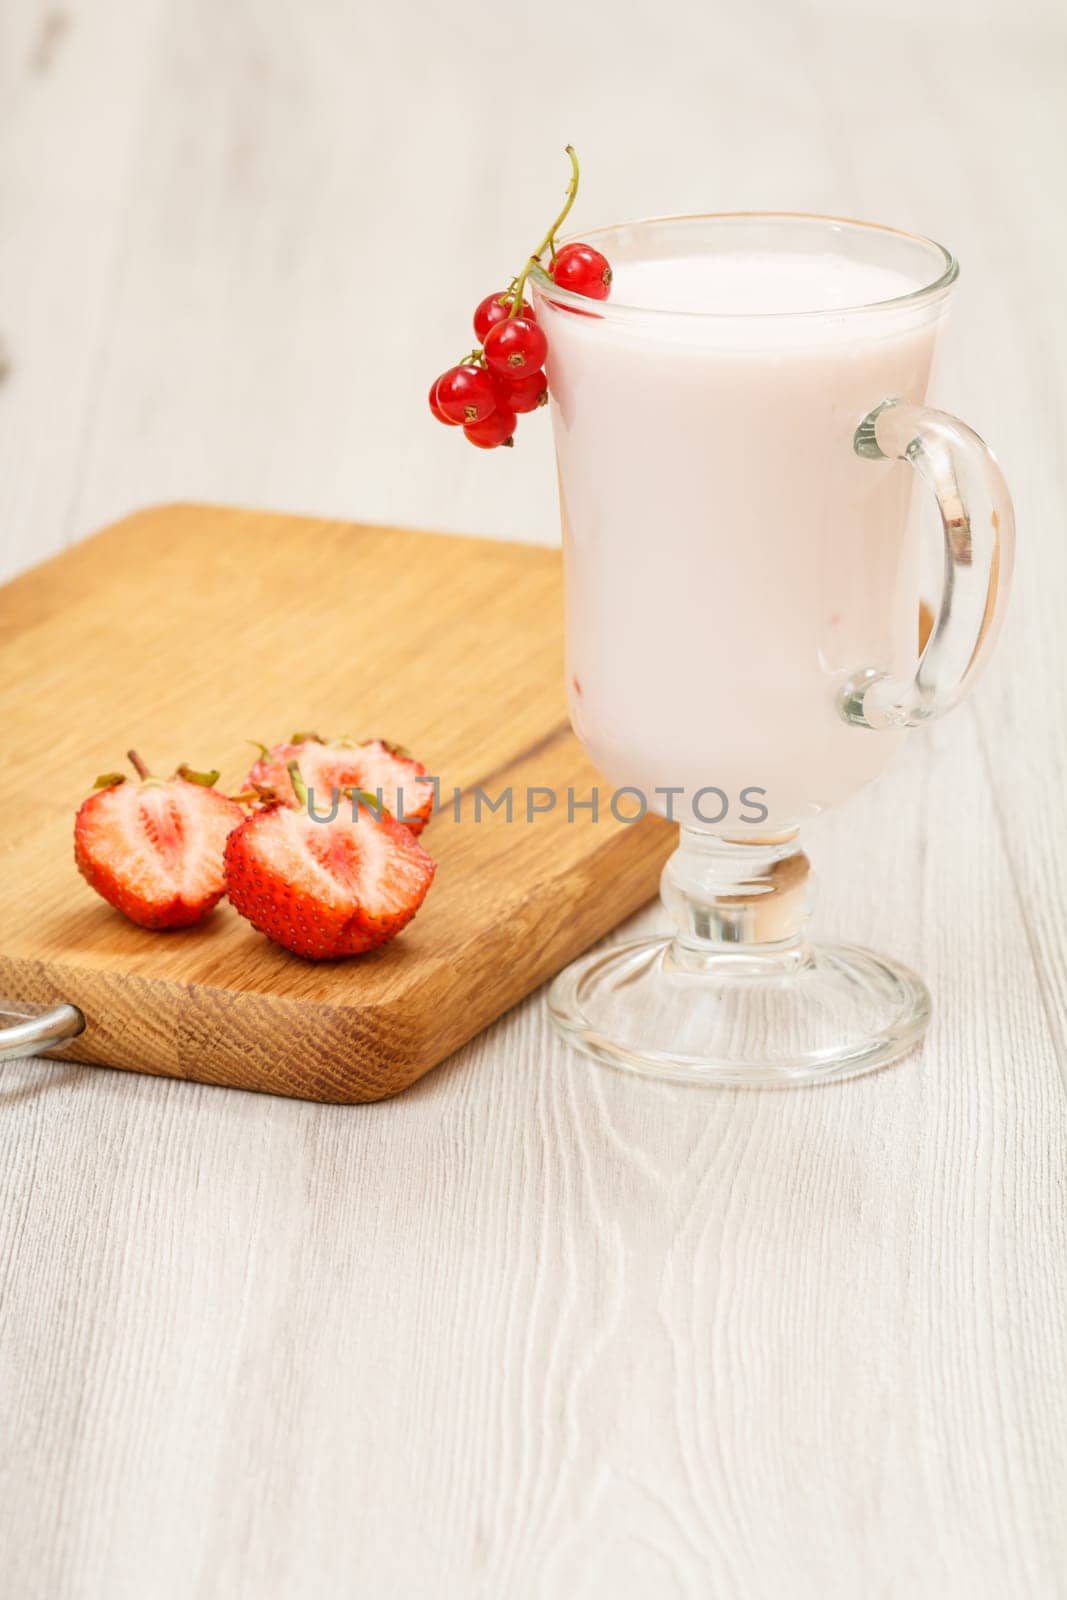 Glass of delicious strawberry yogurt with mint leaves and fresh strawberries on wooden cutting board.